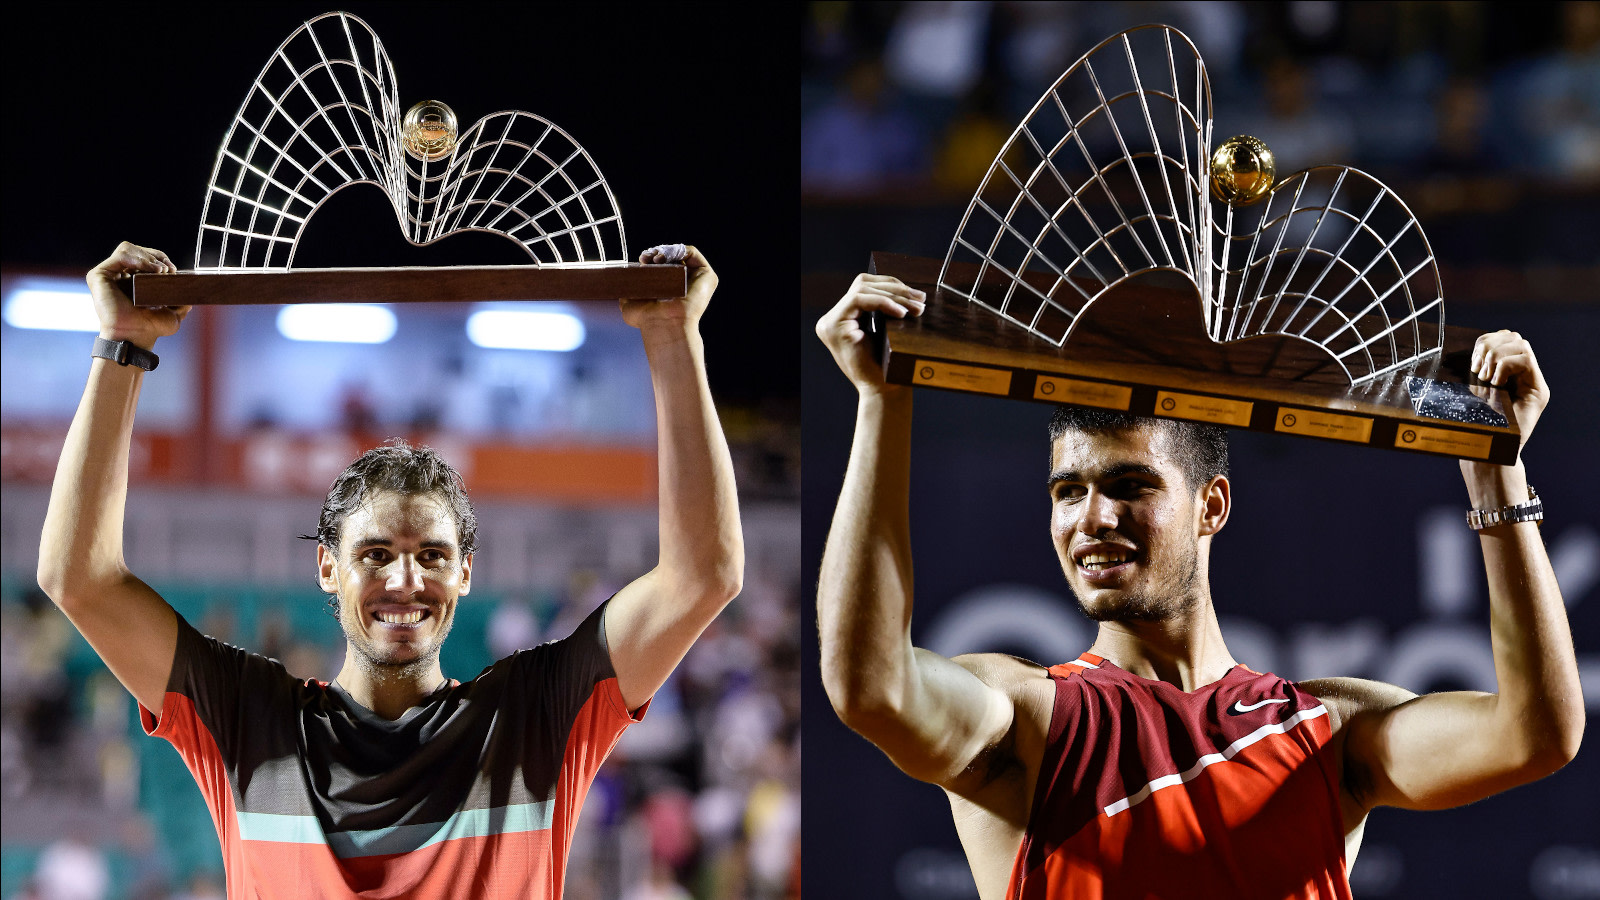 As Nadal and Alcaraz can attest, the Golden Swing is a tremendous opportunity for players—and a lively festival for fans